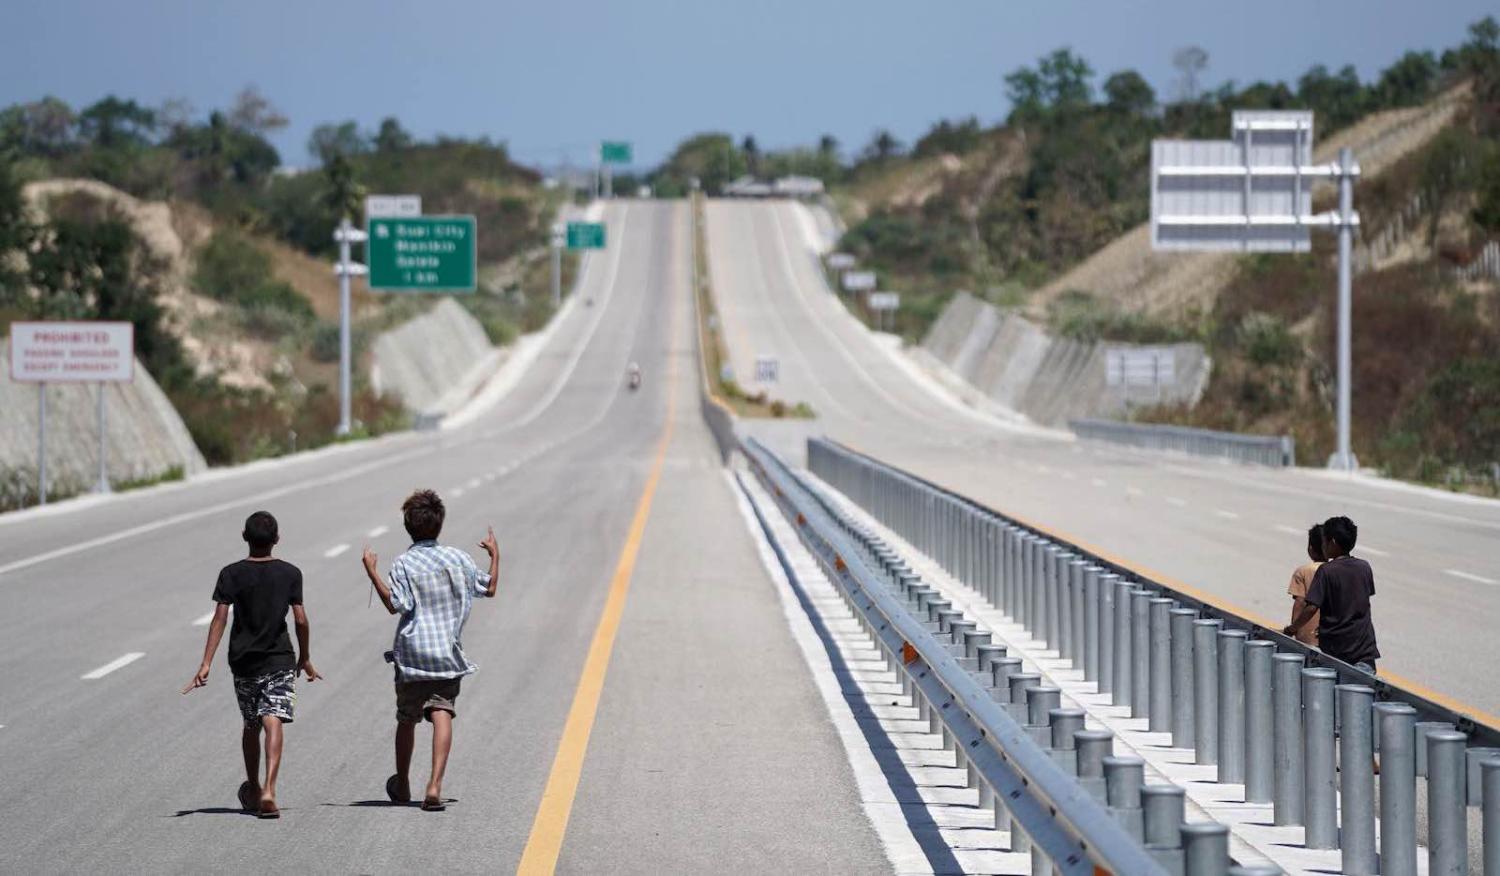 Young boys on an empty highway near Suai in Timor-Leste, built by the China Railway Group, 24 August 2019. (Photo: Dimas Ardian via Getty)